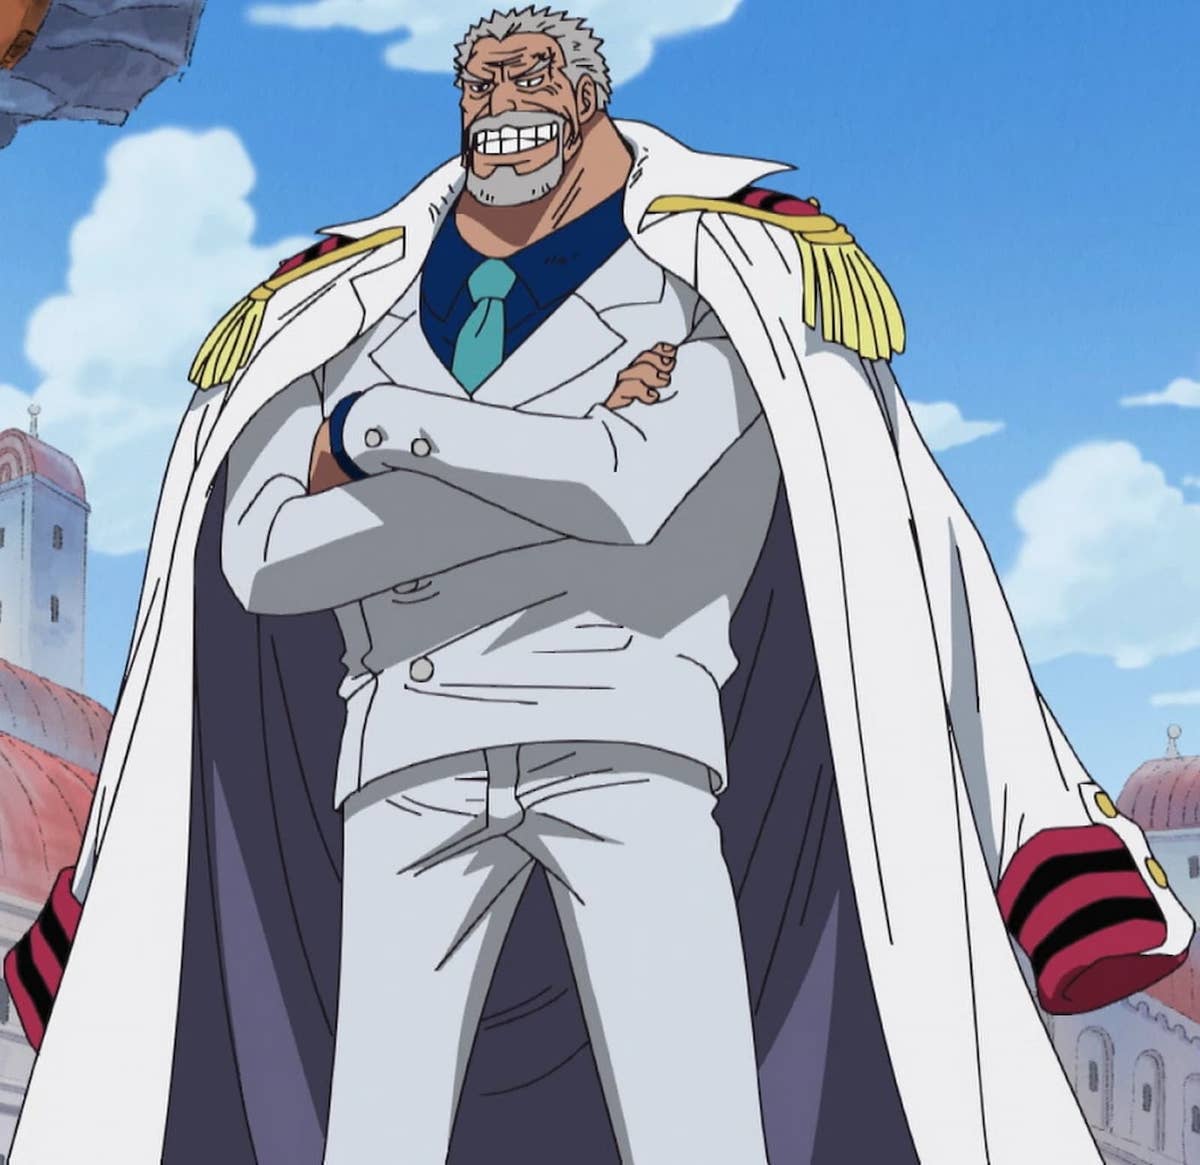 Netflix's One Piece gives an early introduction to Vice Admiral